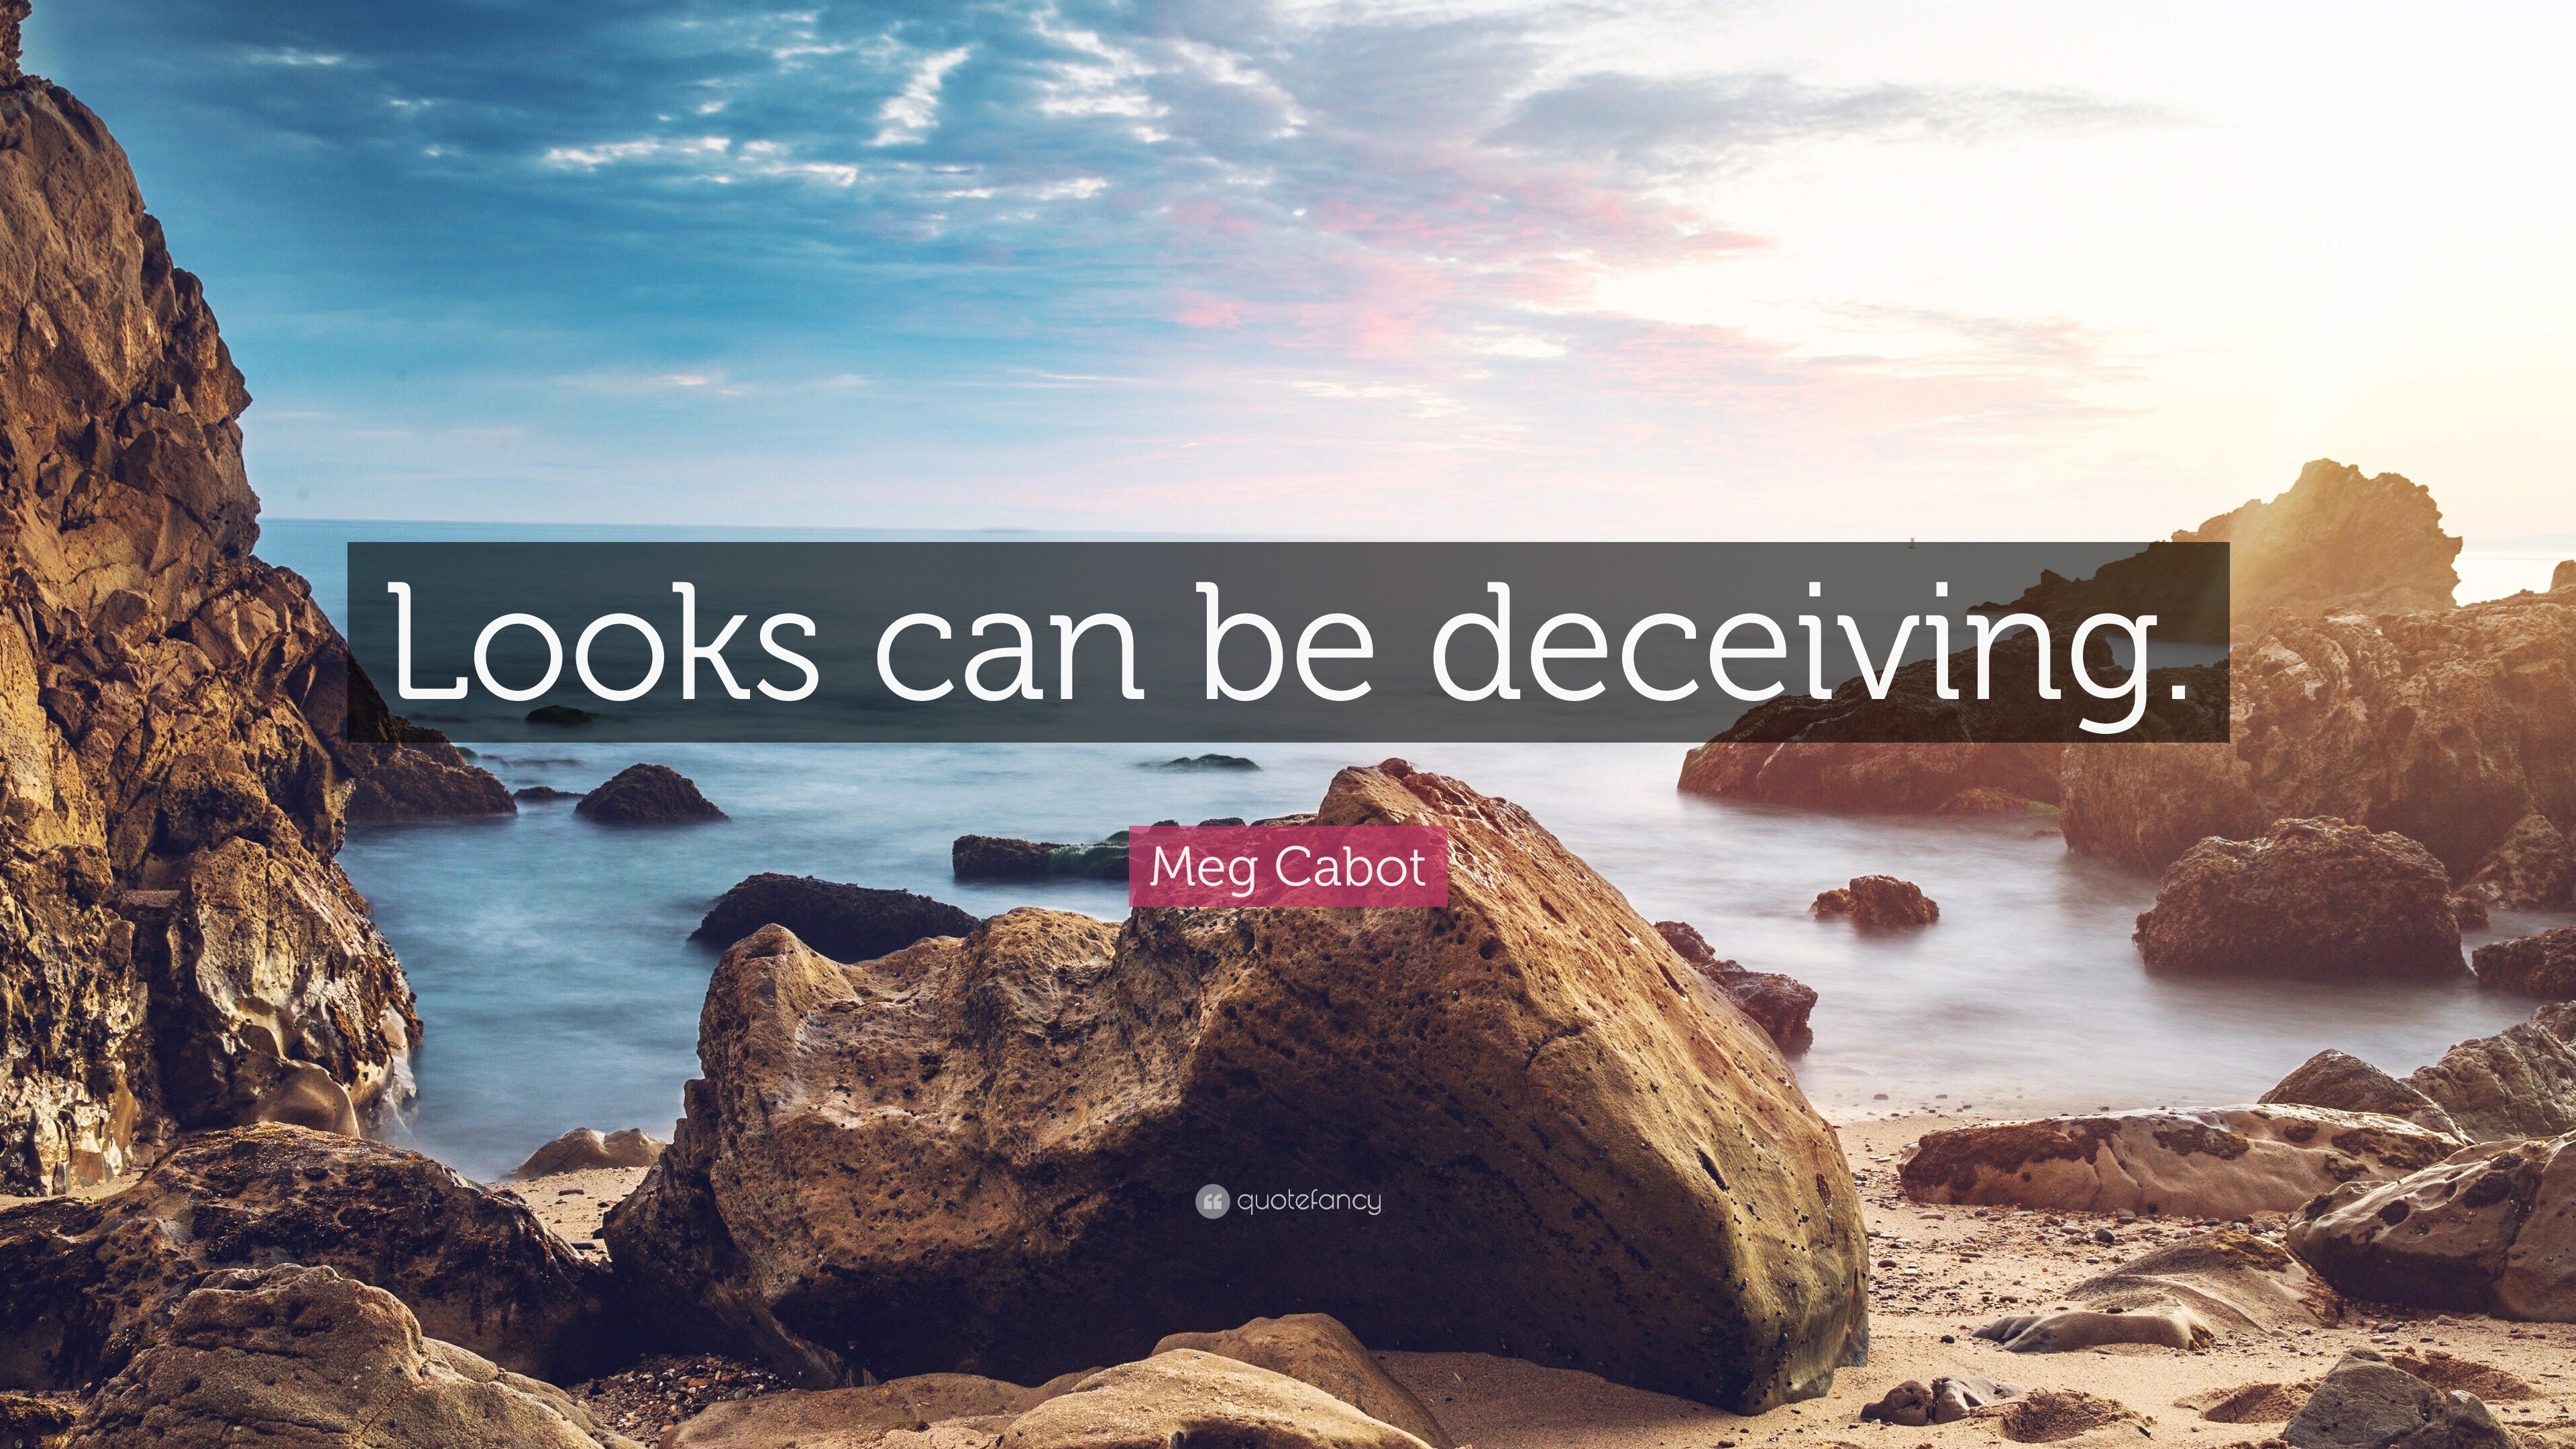 Meg Cabot Quote “Looks can be deceiving.”